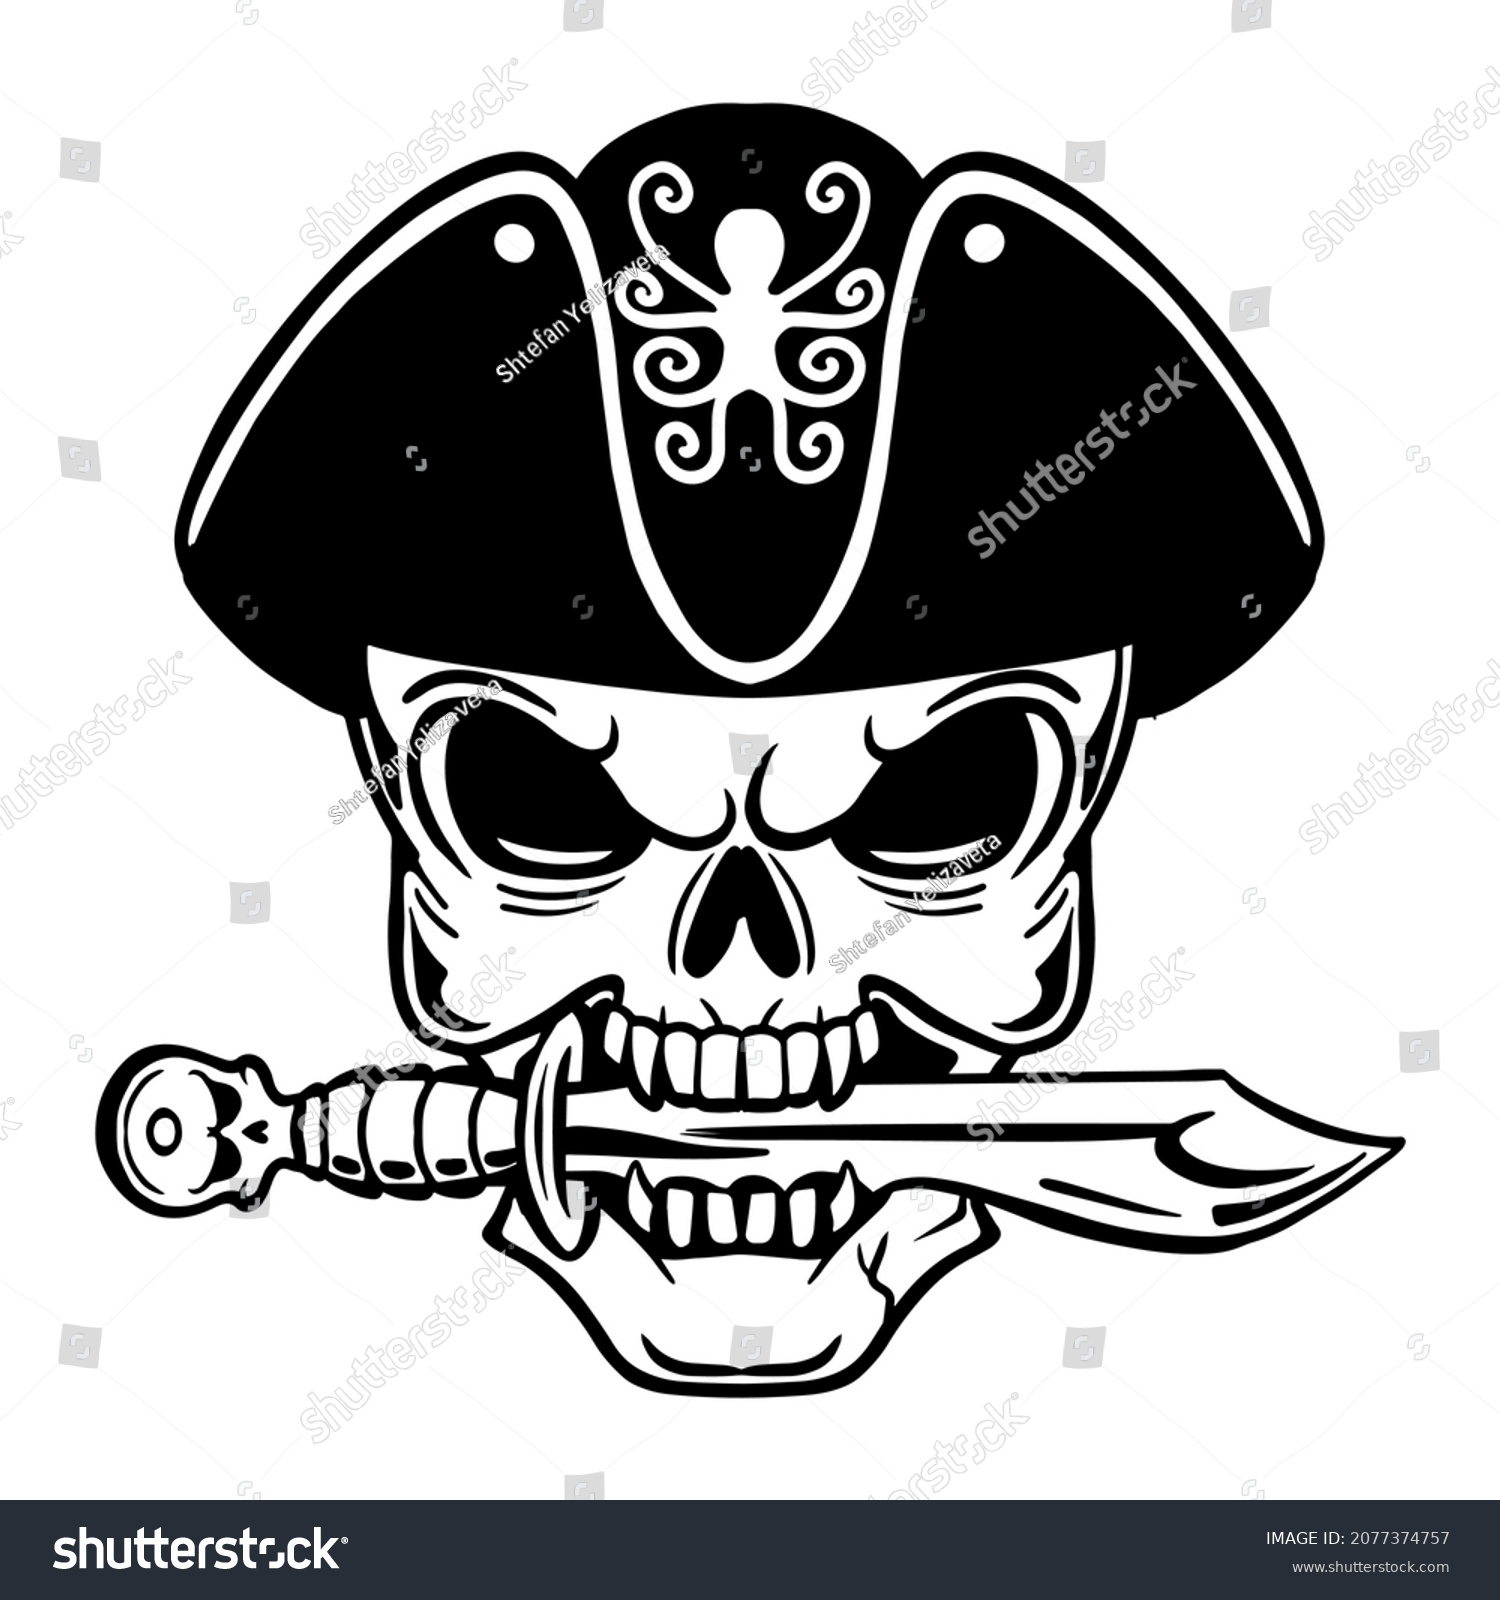 SVG of Skull pirate svg cut. Skull of a pirate with a saber in his teeth.Pirate skull emblem illustration with saber. Pirate with hat vector cutting svg